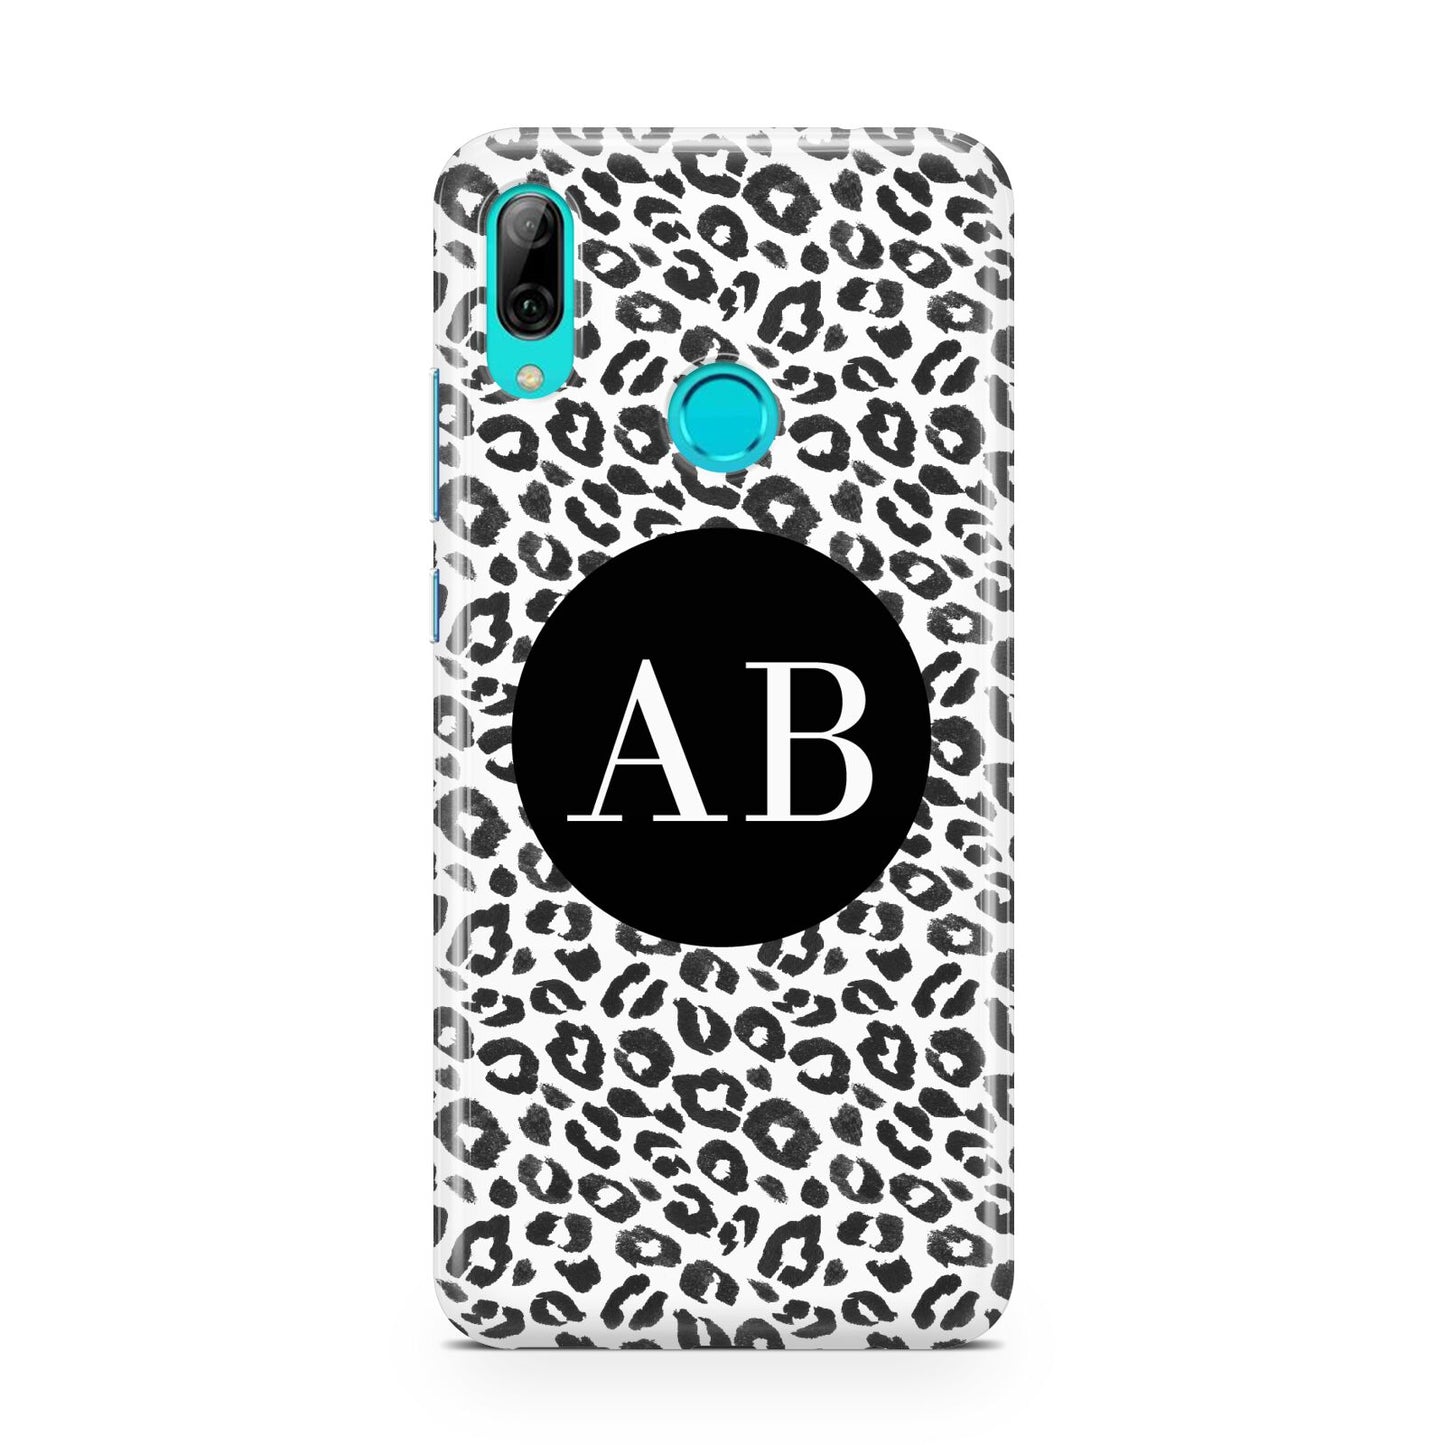 Leopard Print Black and White Huawei P Smart 2019 Case